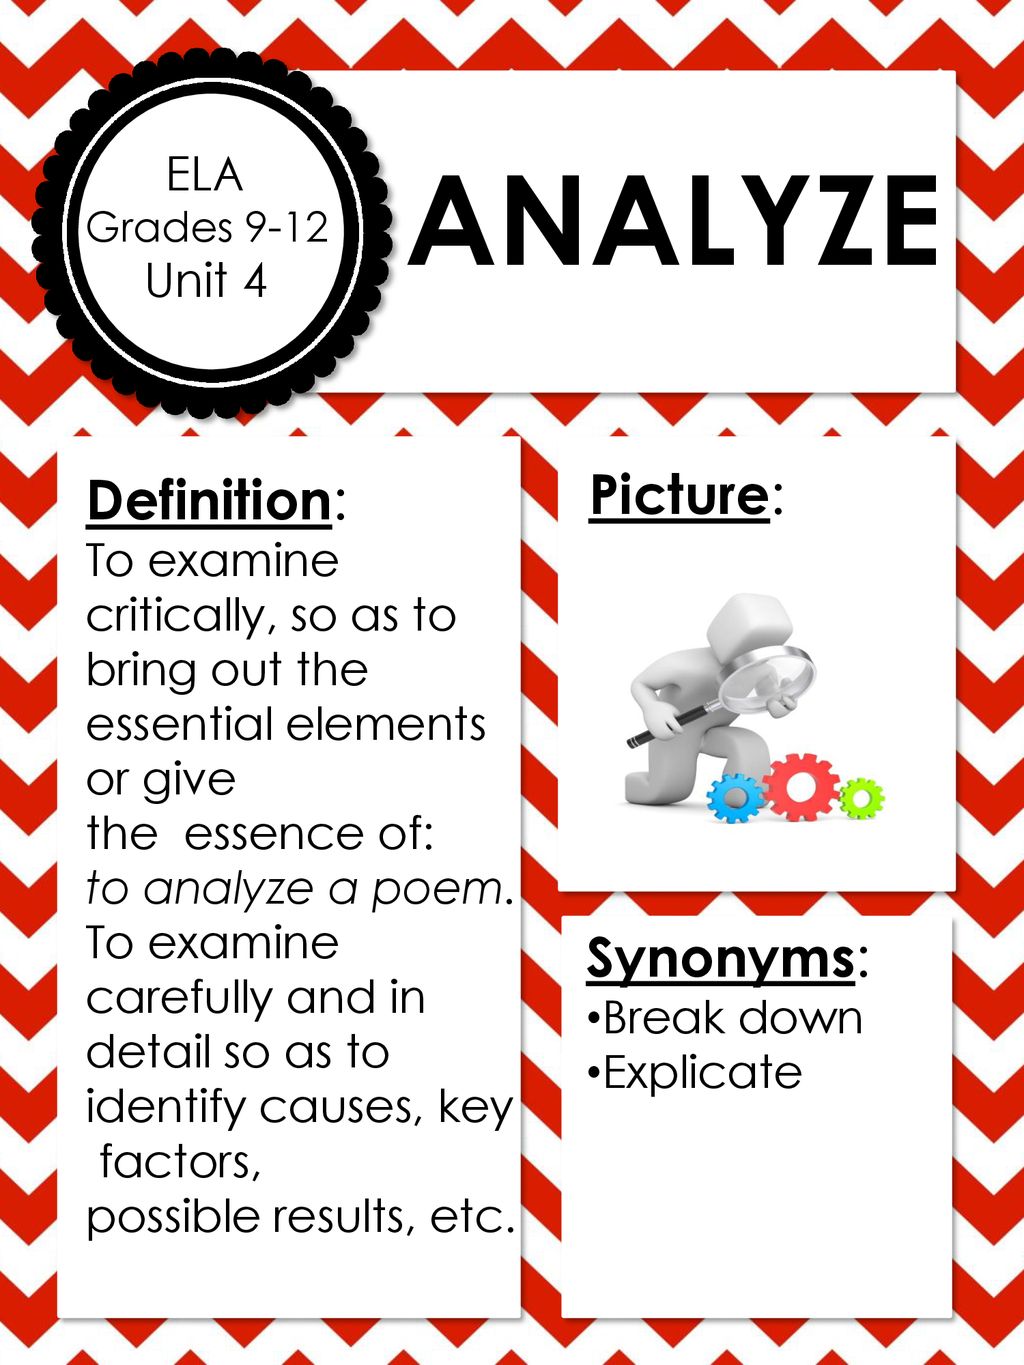 Analyze Definition & Meaning